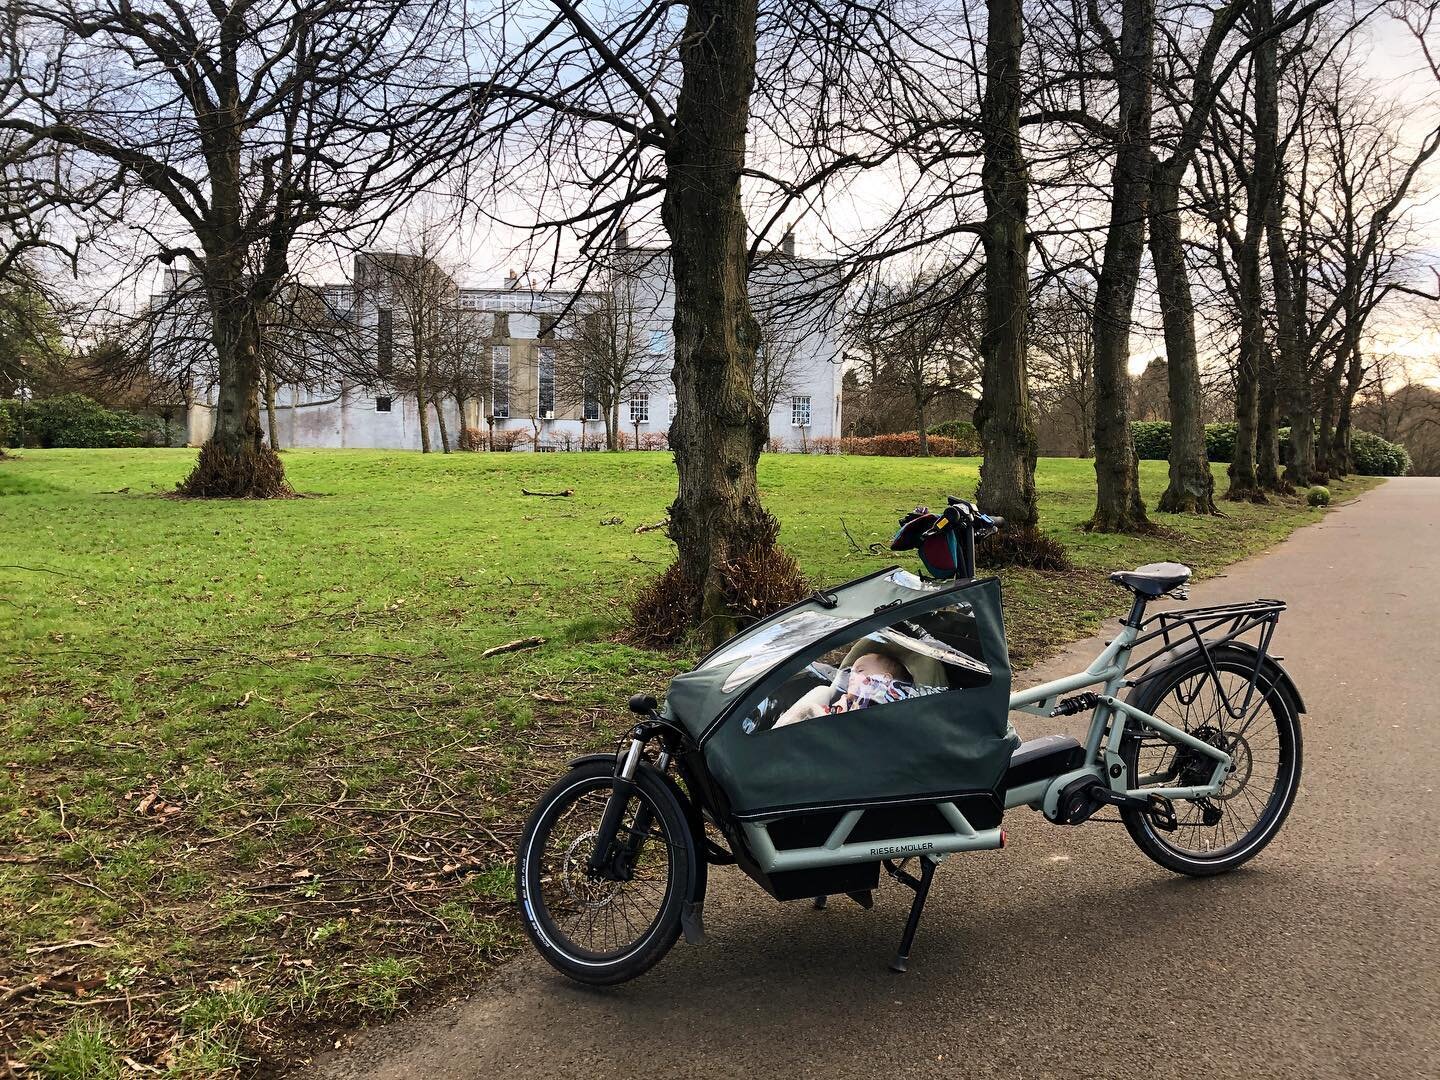 The babymobile is finally back up and running after a minor incident with a grumpy driver leading to a bent rear wheel. 
- - -
Spent the afternoon pootling around with a sleeping baby in the front, such a joy to feel the wind in my hair, the sun on m